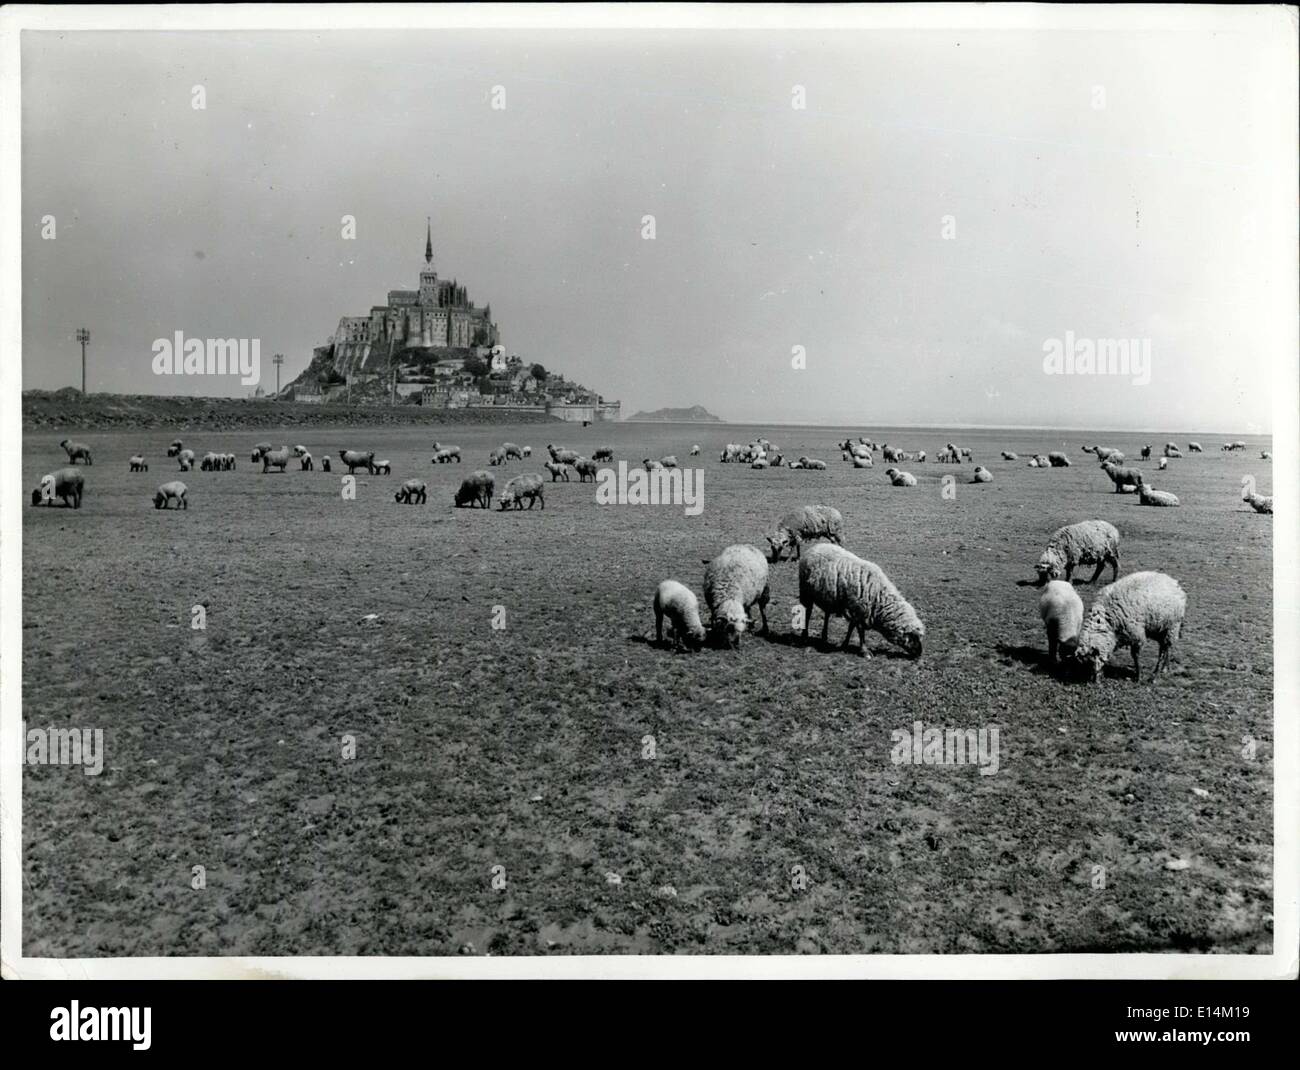 Apr. 05, 2012 - Sheep graze in the fields near Mont St. Michel, Normandy, which is one of France's richest pasture lands. Stock Photo